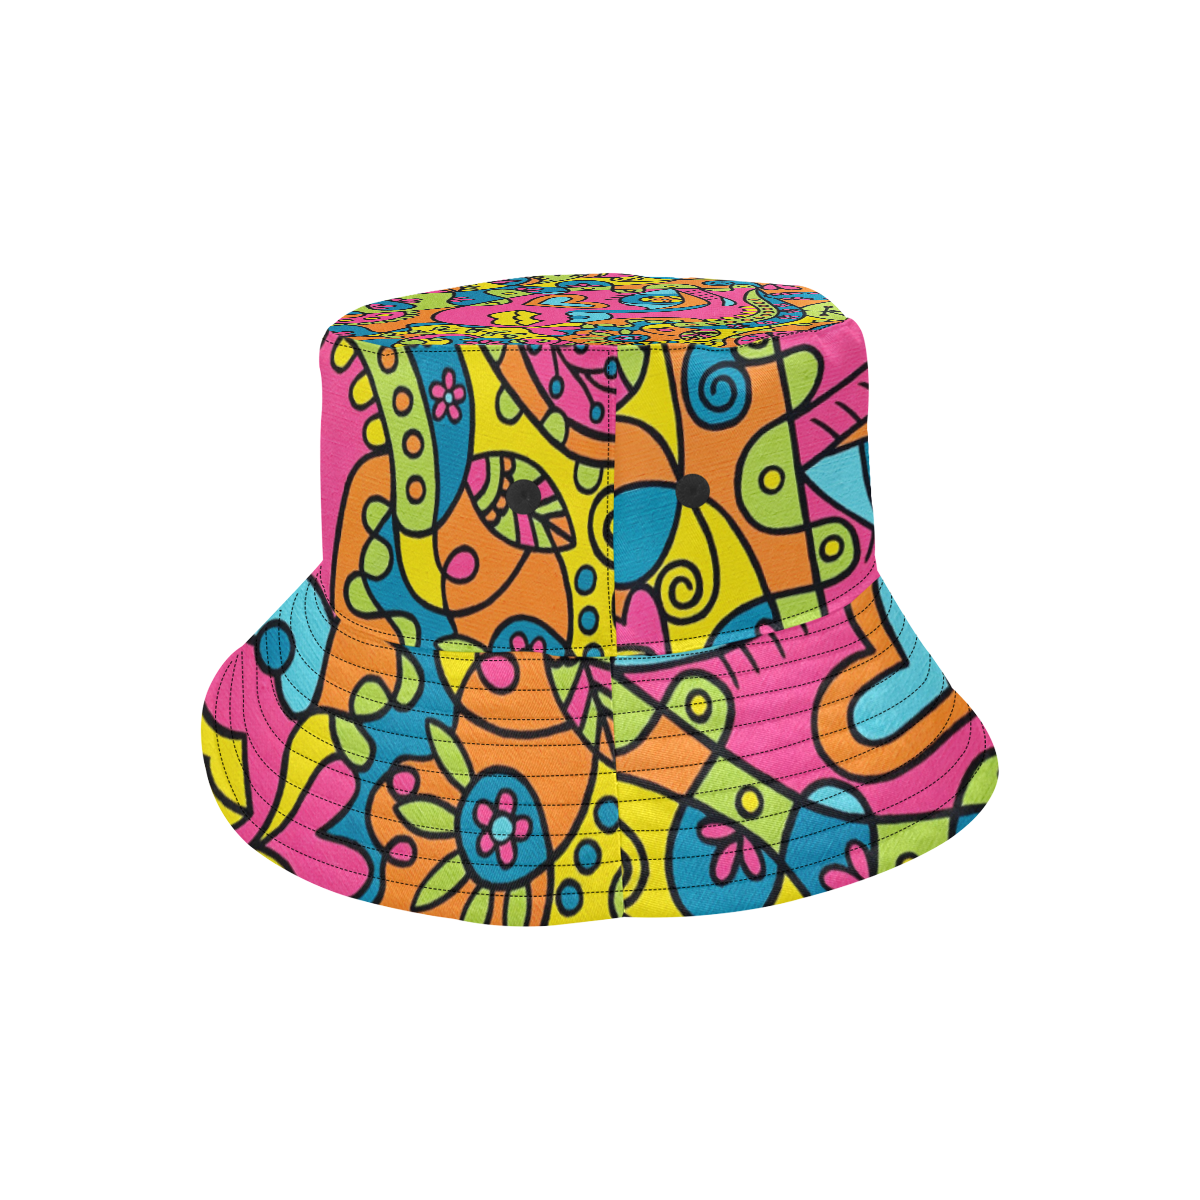 Pretty All Over Print Bucket Hat for Men